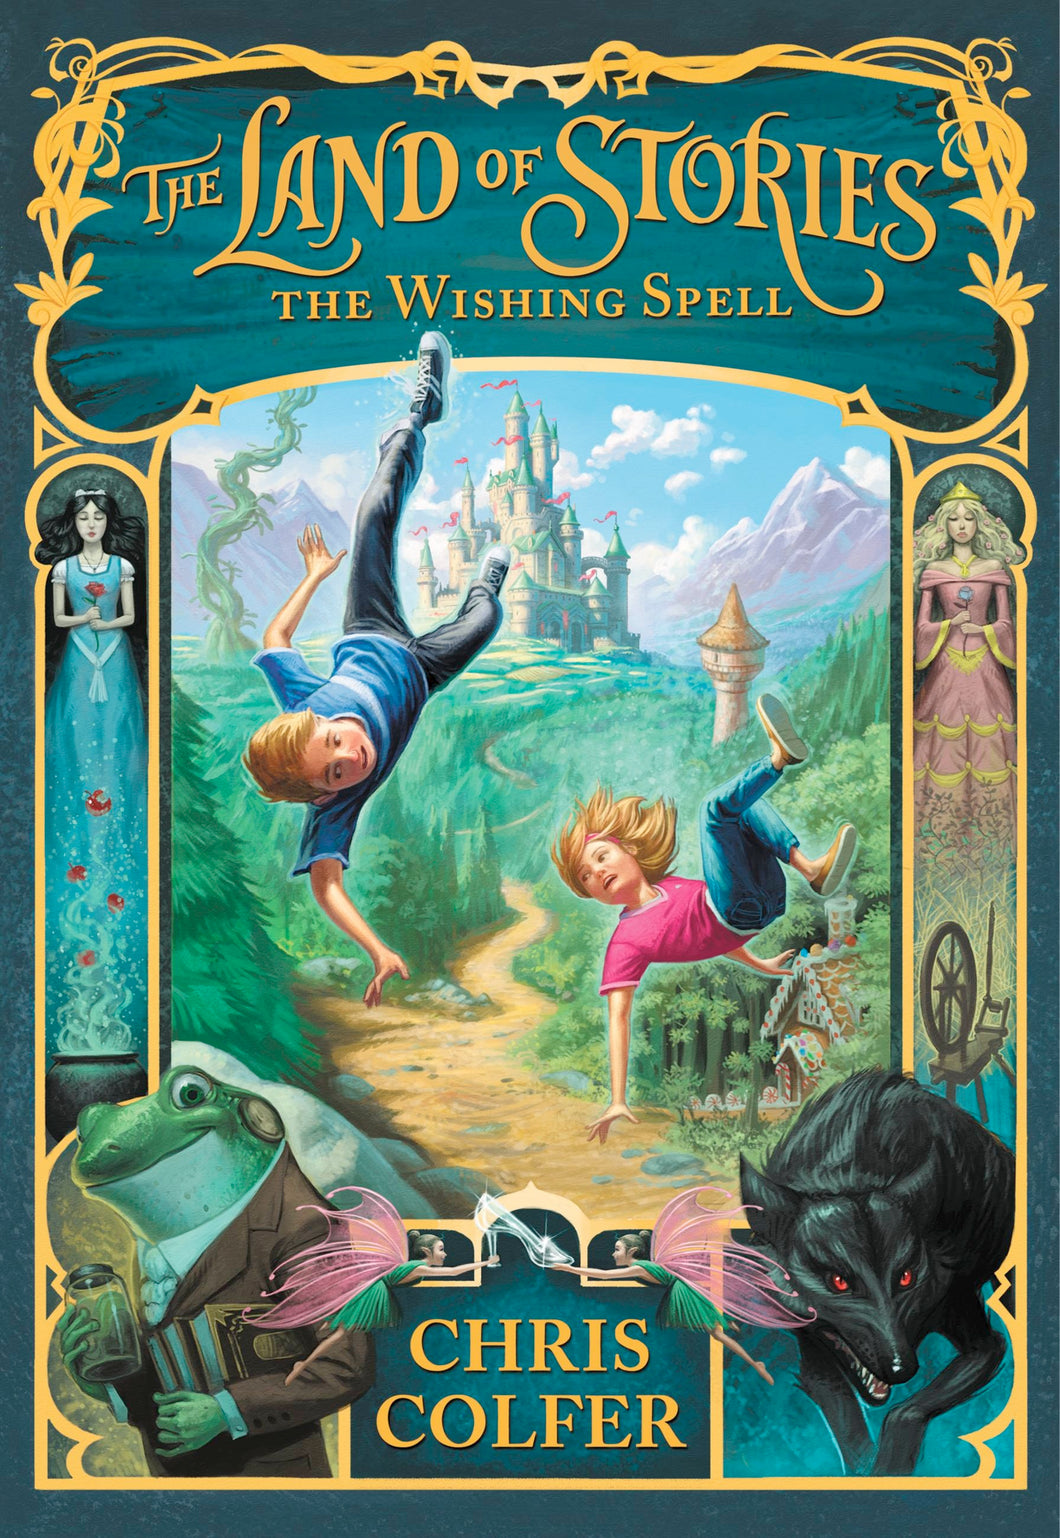 The Wishing Spell by Chris Colfer: stock image of front cover.